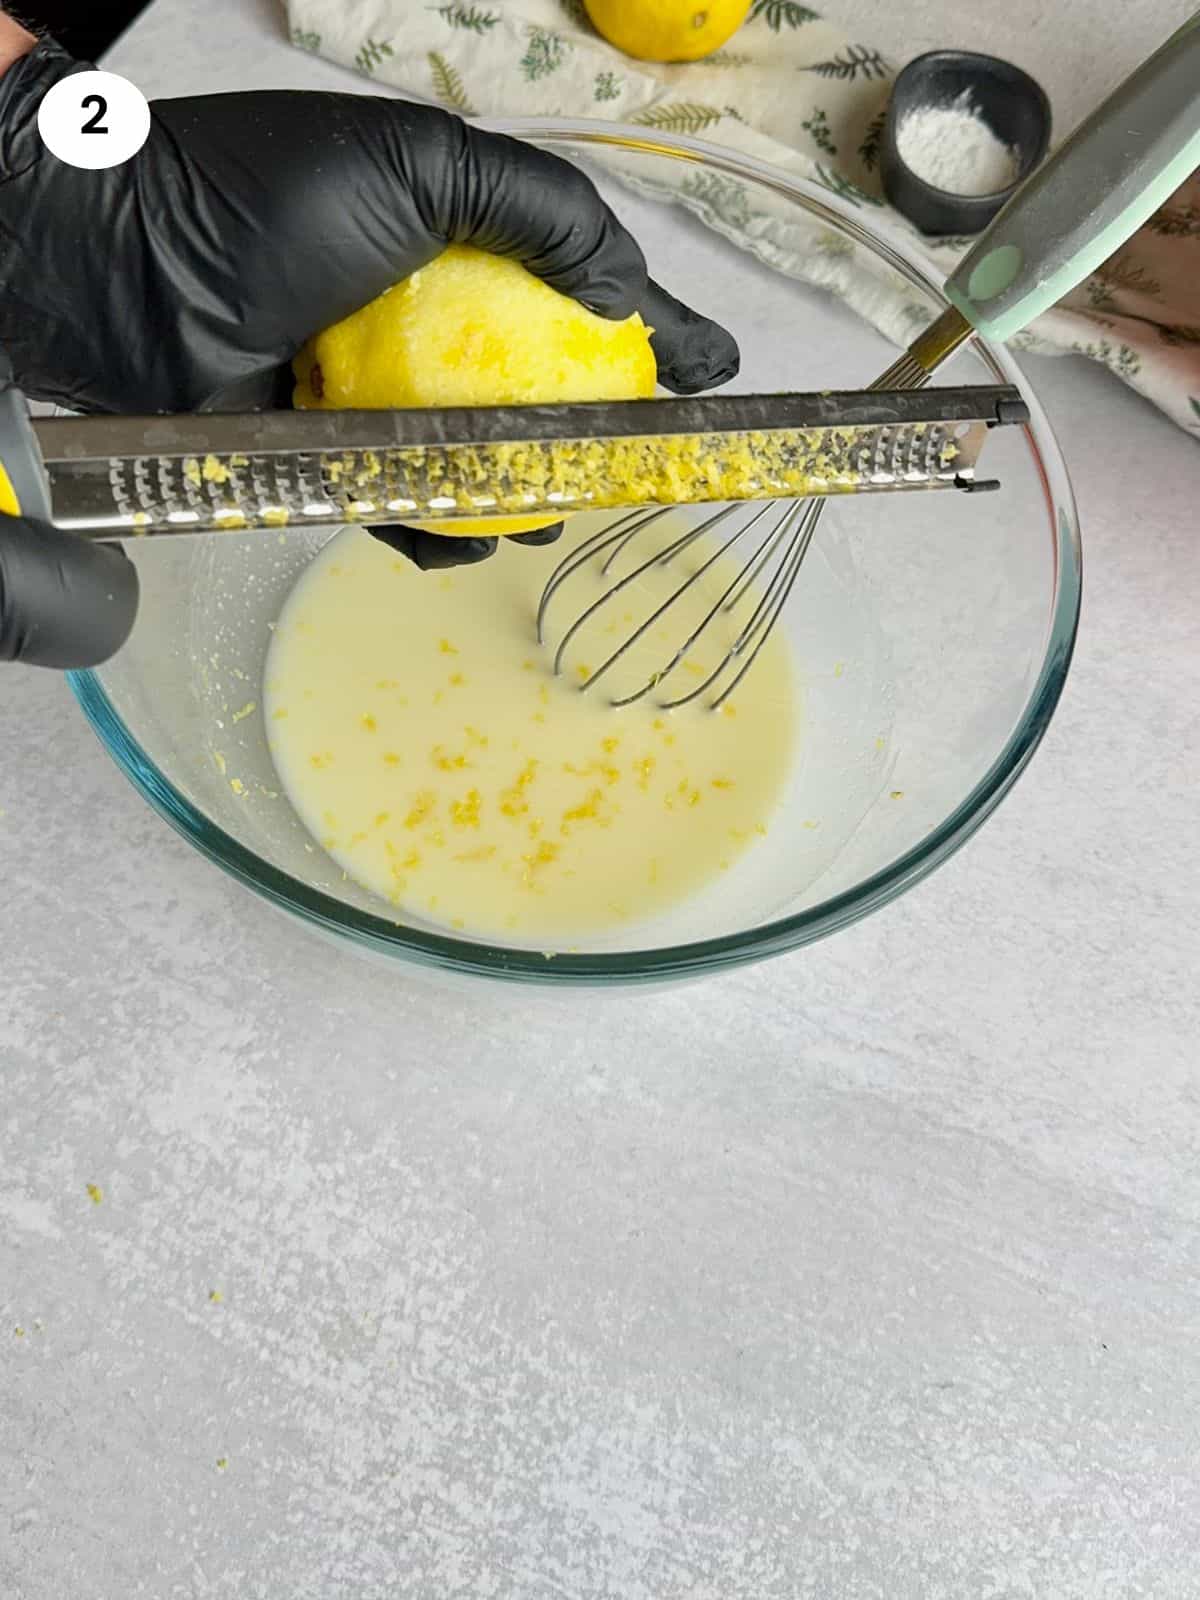 Zesting a lemon and adding it to the mixture.